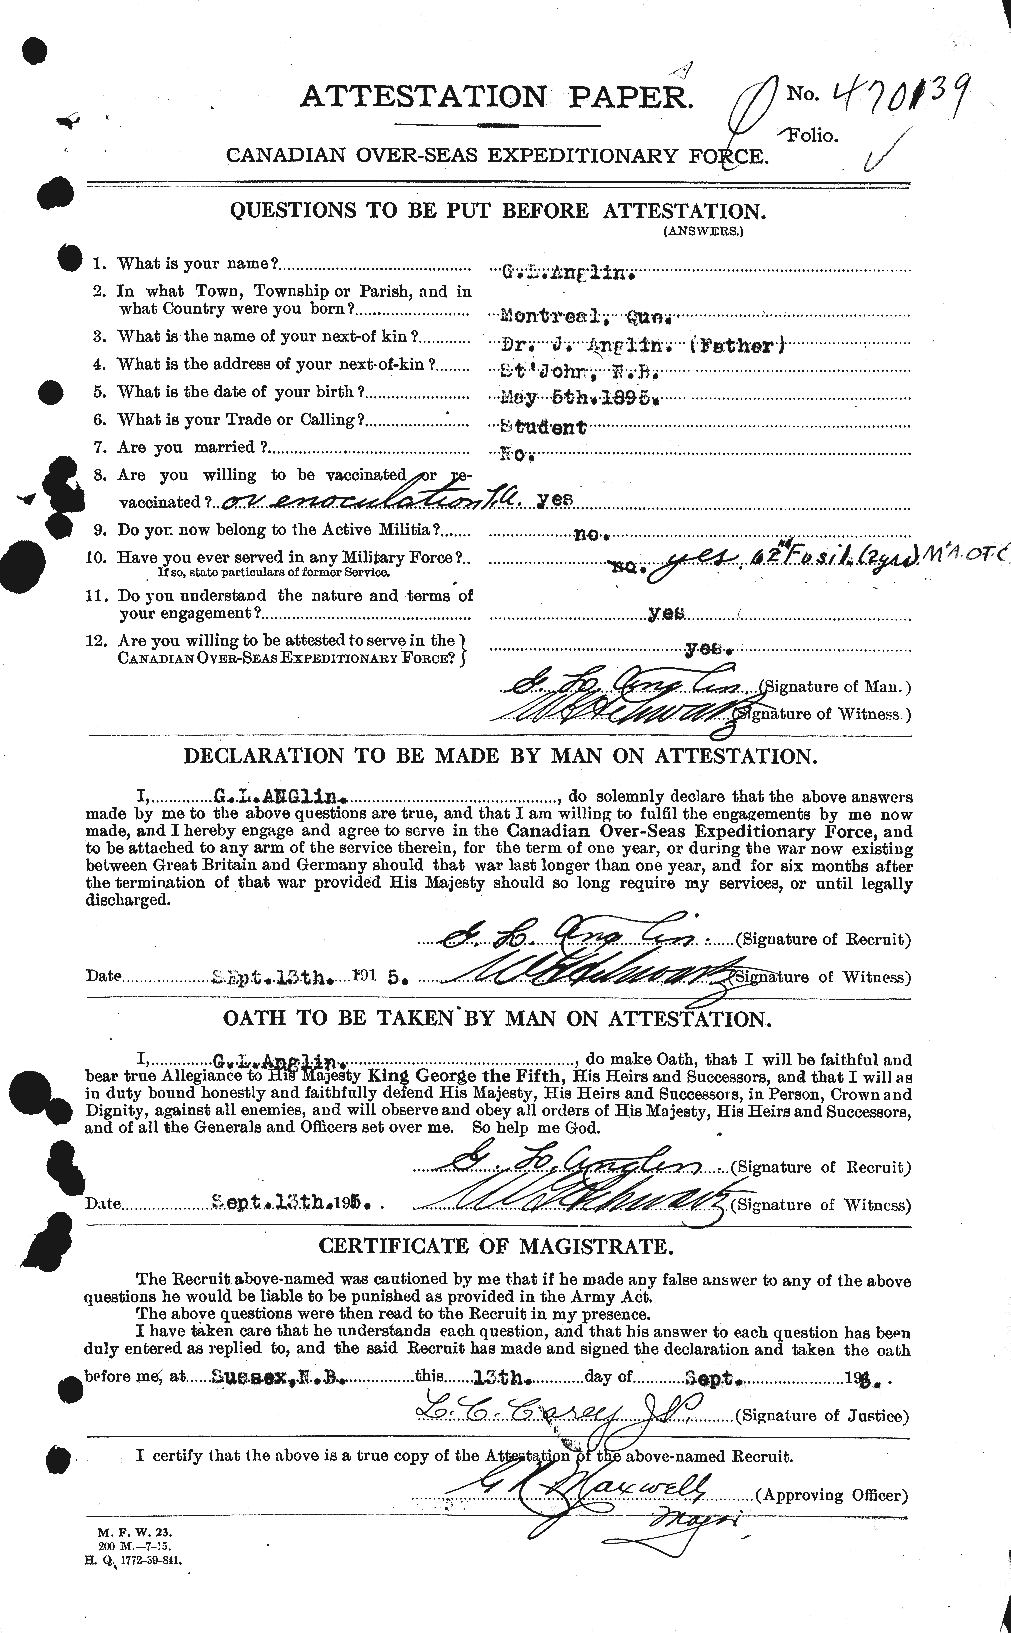 Personnel Records of the First World War - CEF 209152a